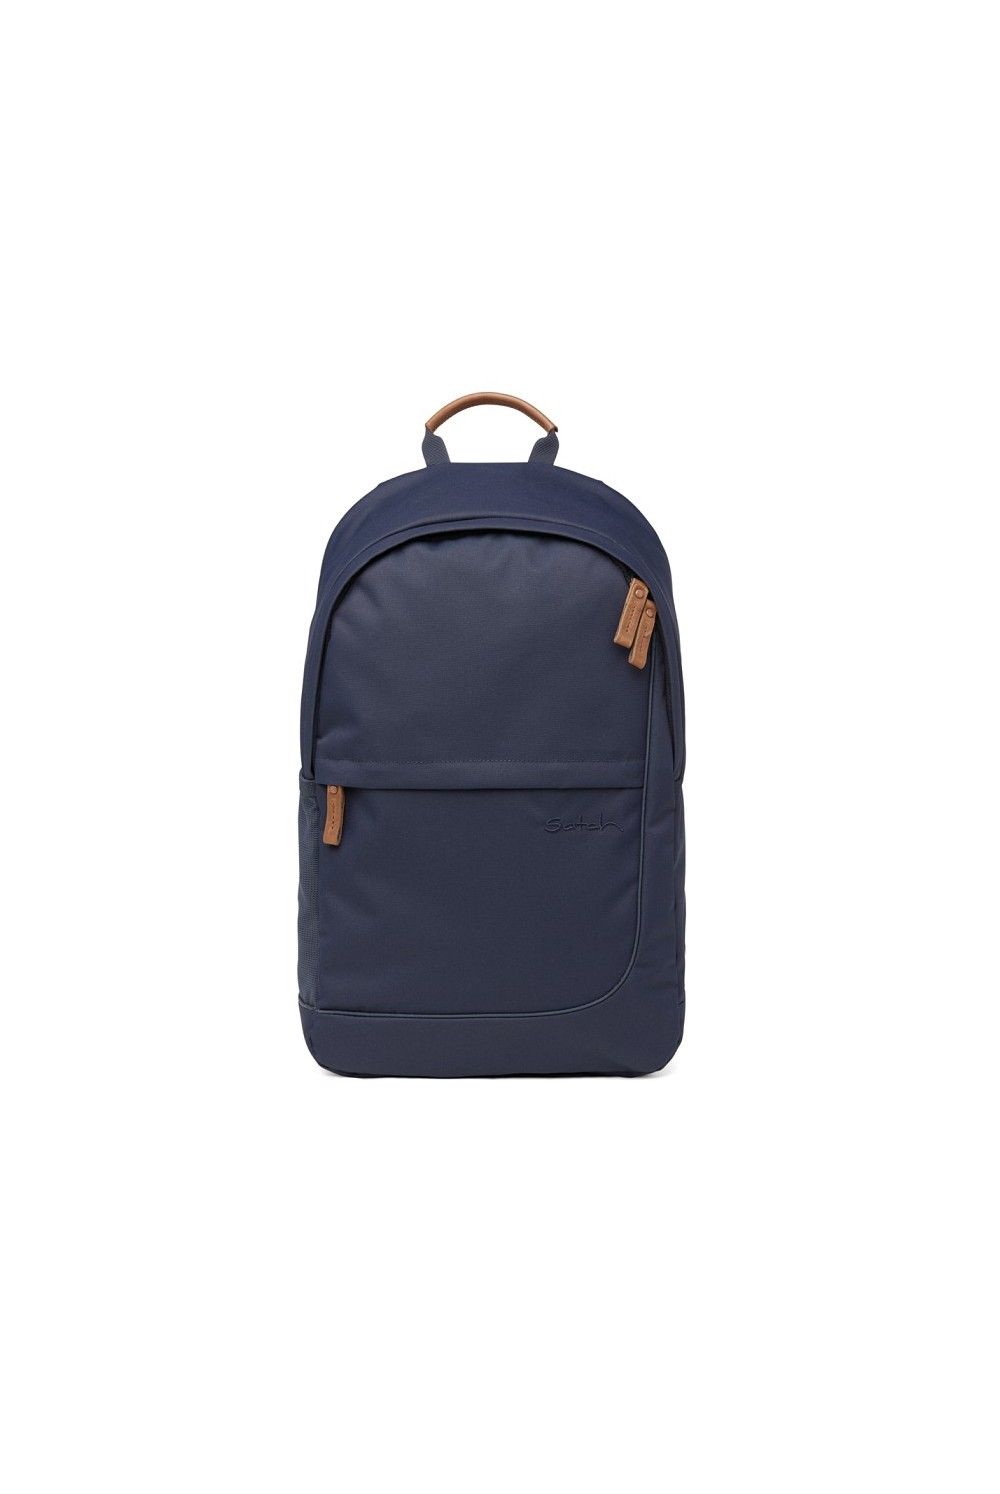 Satch Fly Rucksack Nordic Blue